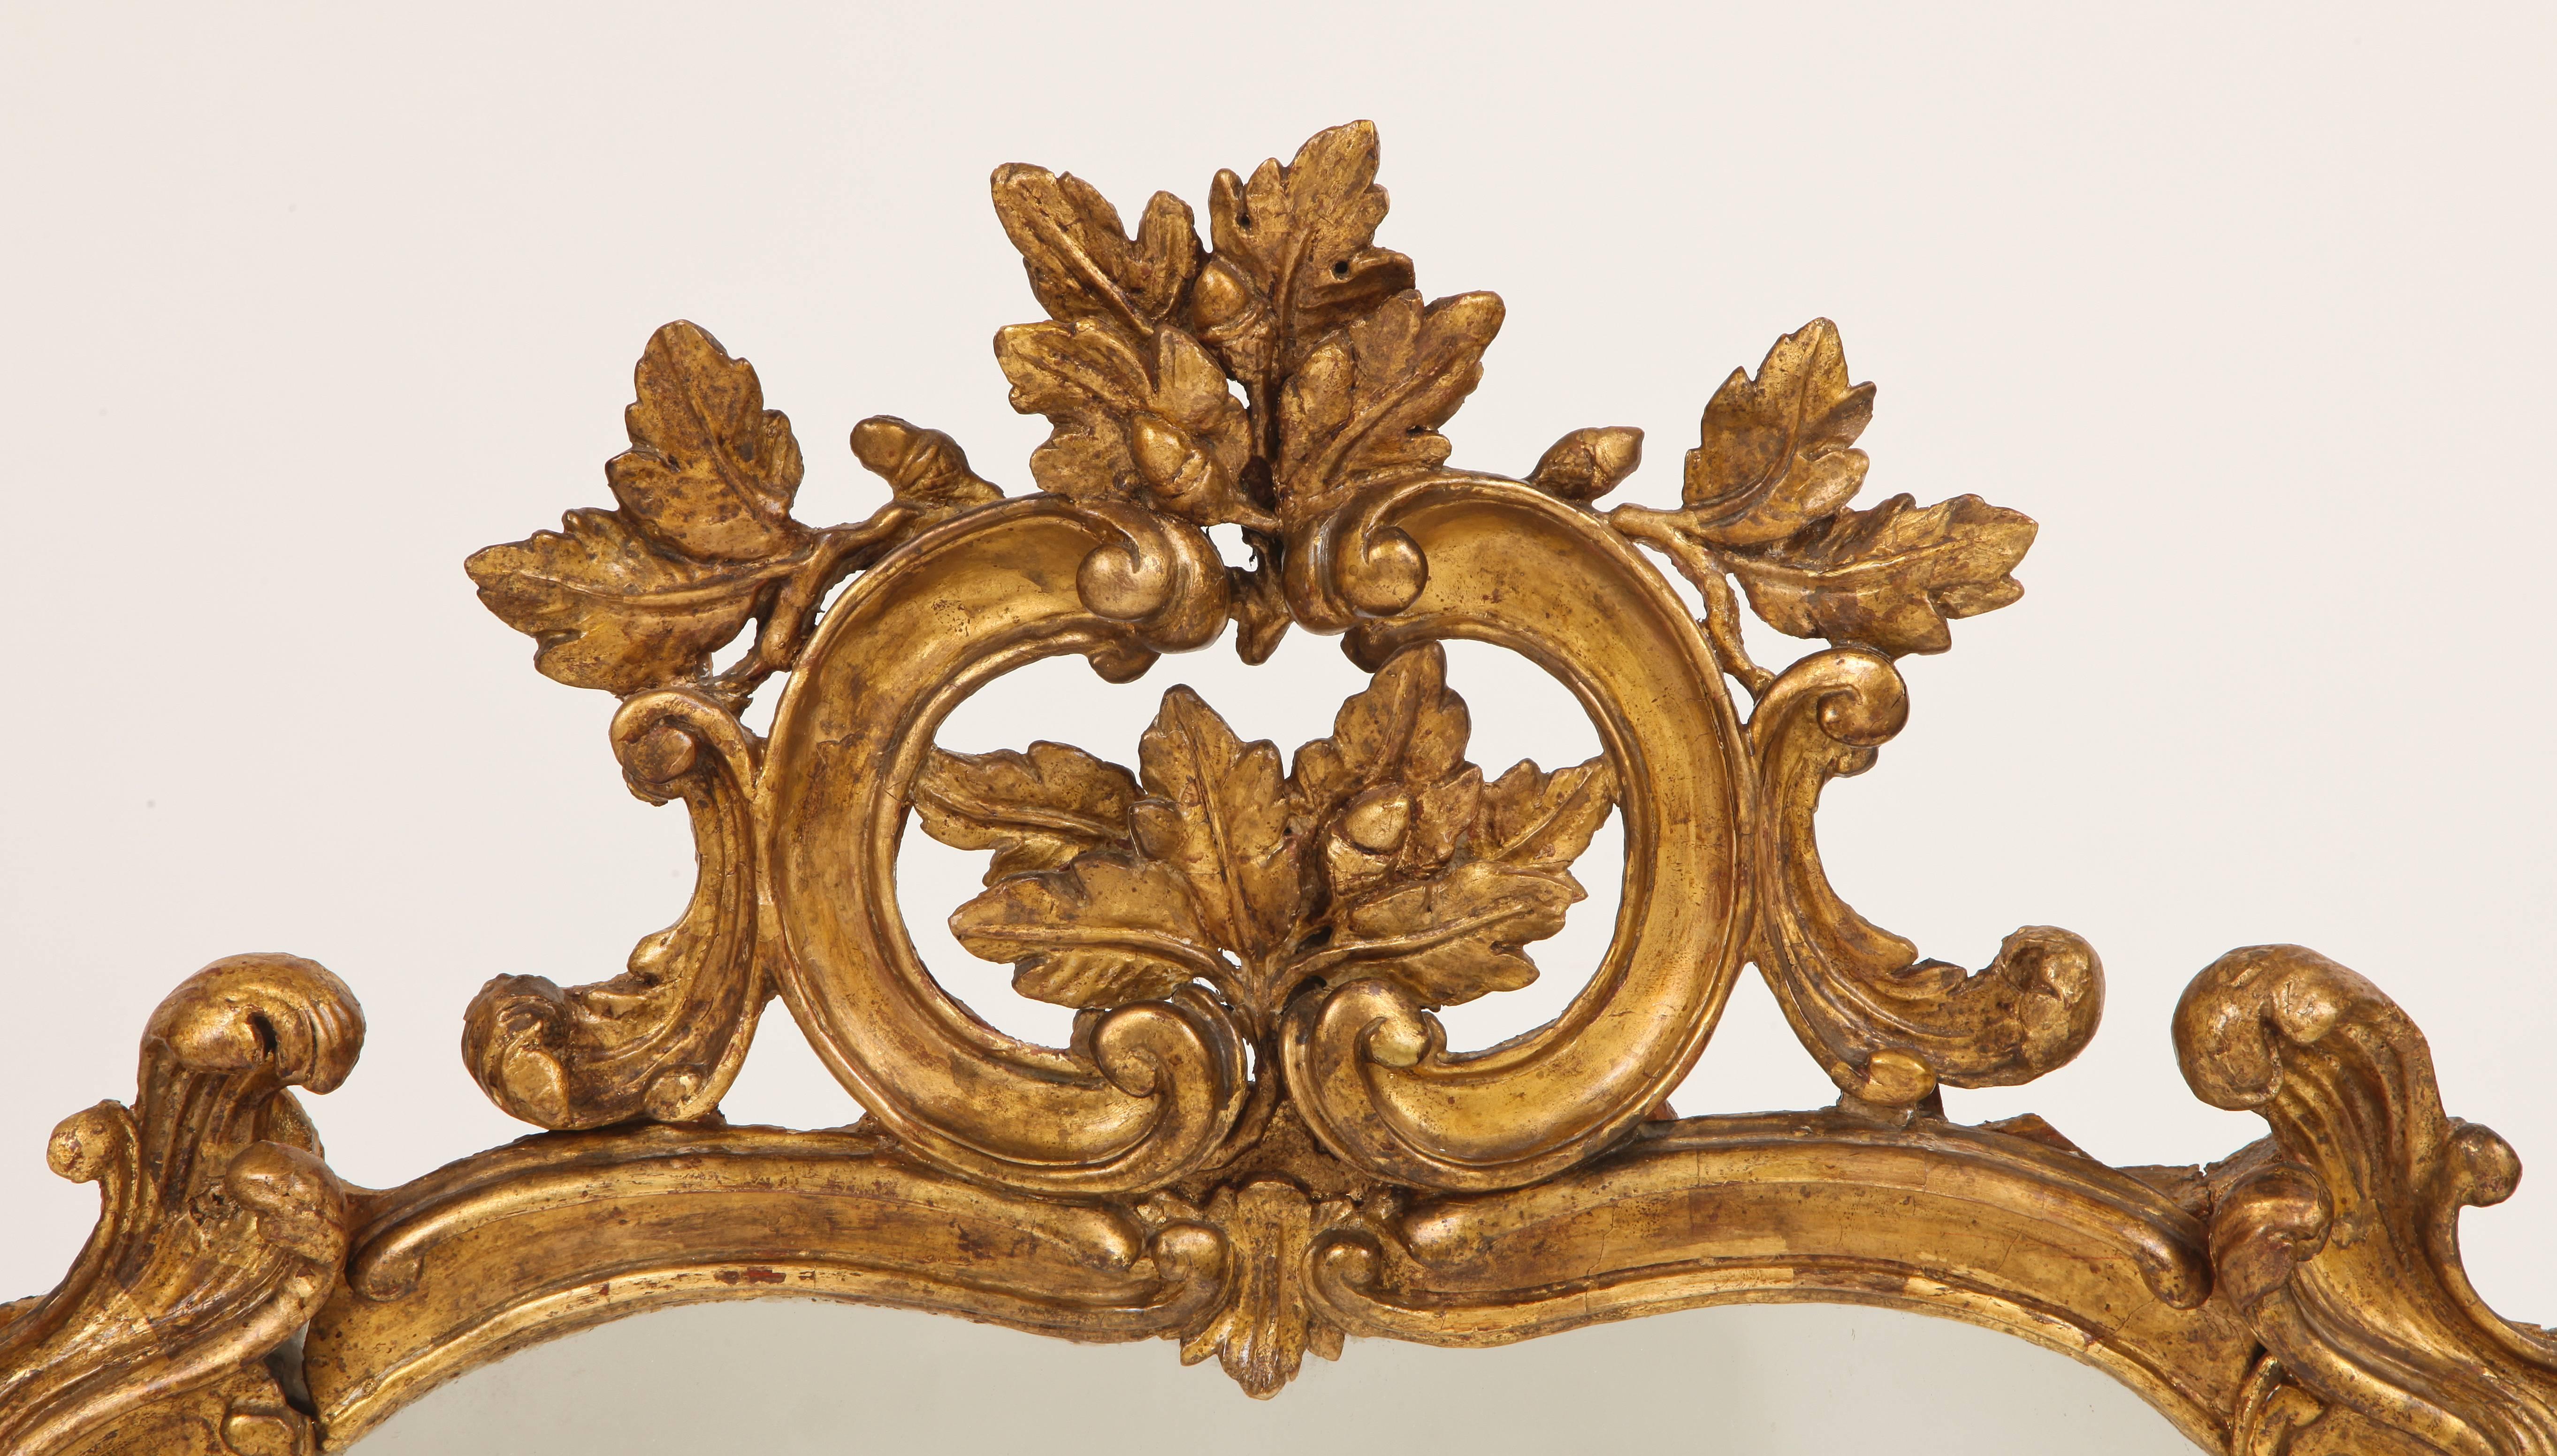 This fine French Louis XV period mirror has oak leaf and acorn decoration amidst C and S curves, epitomizing the Rococo style in gilded wood and mirror glass.